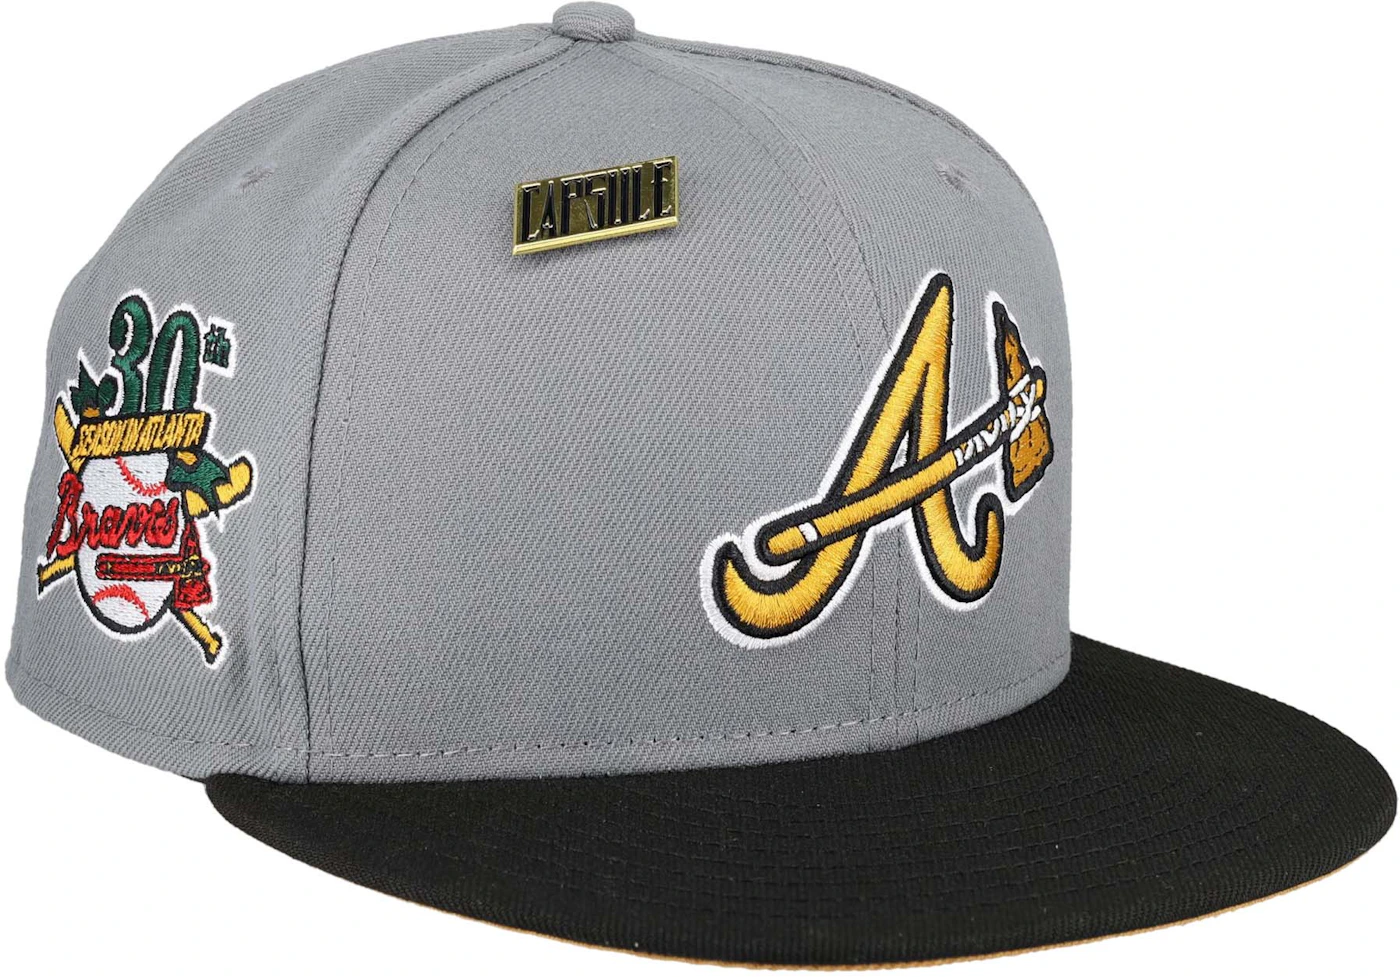 New Era Atlanta Braves Turner Field Capsule Hats 59Fifty Fitted